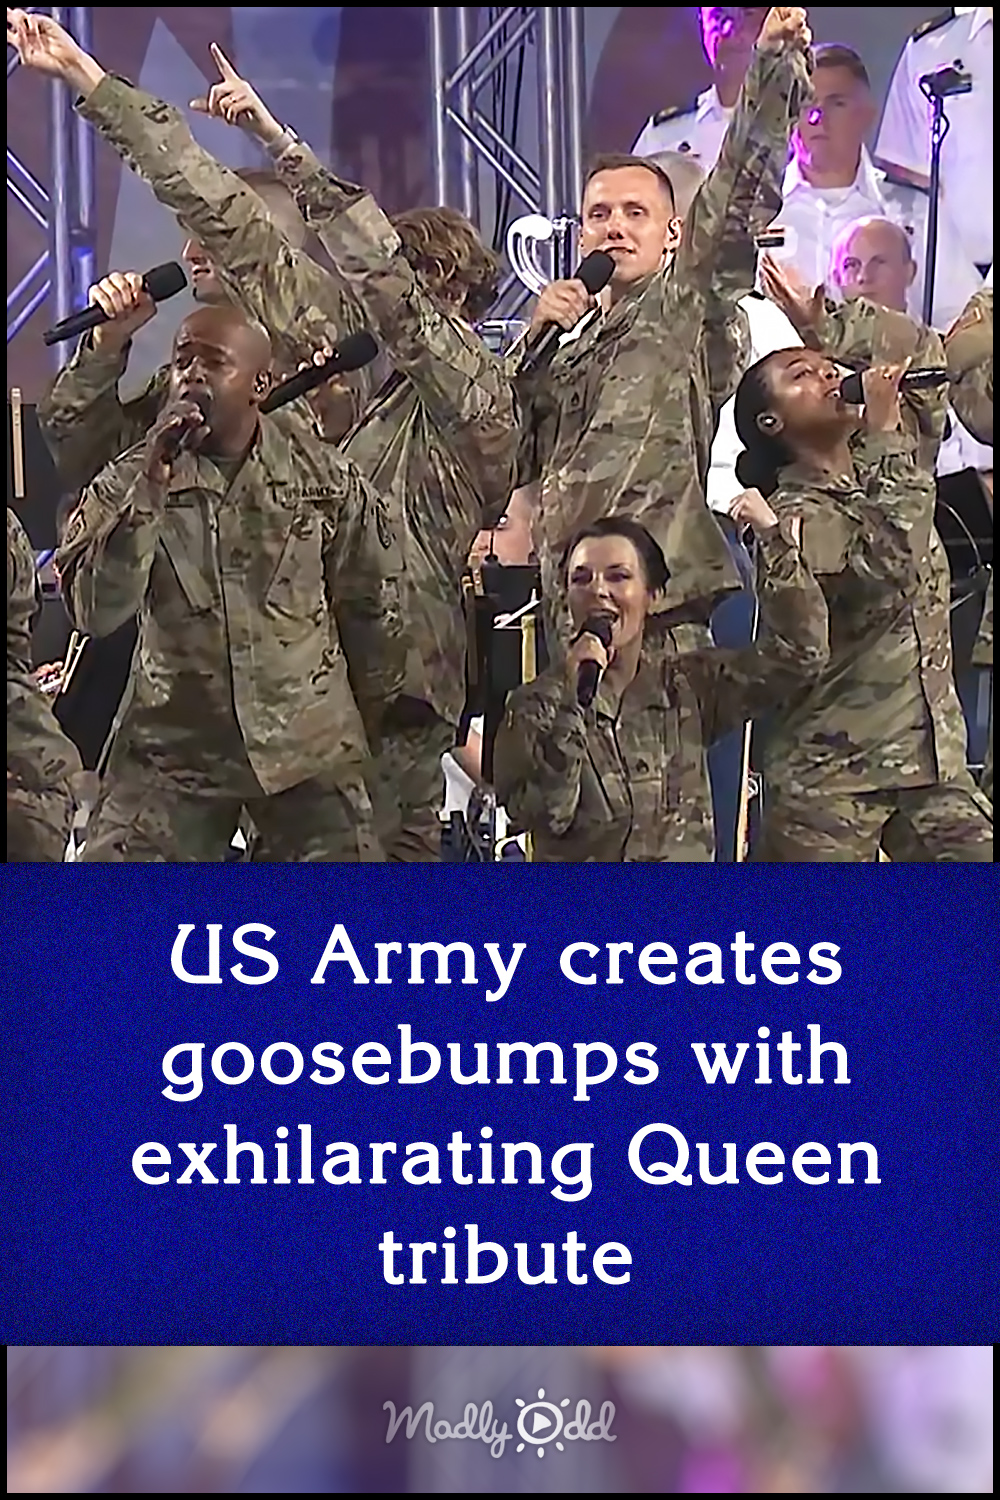 US Army creates goosebumps with exhilarating Queen tribute